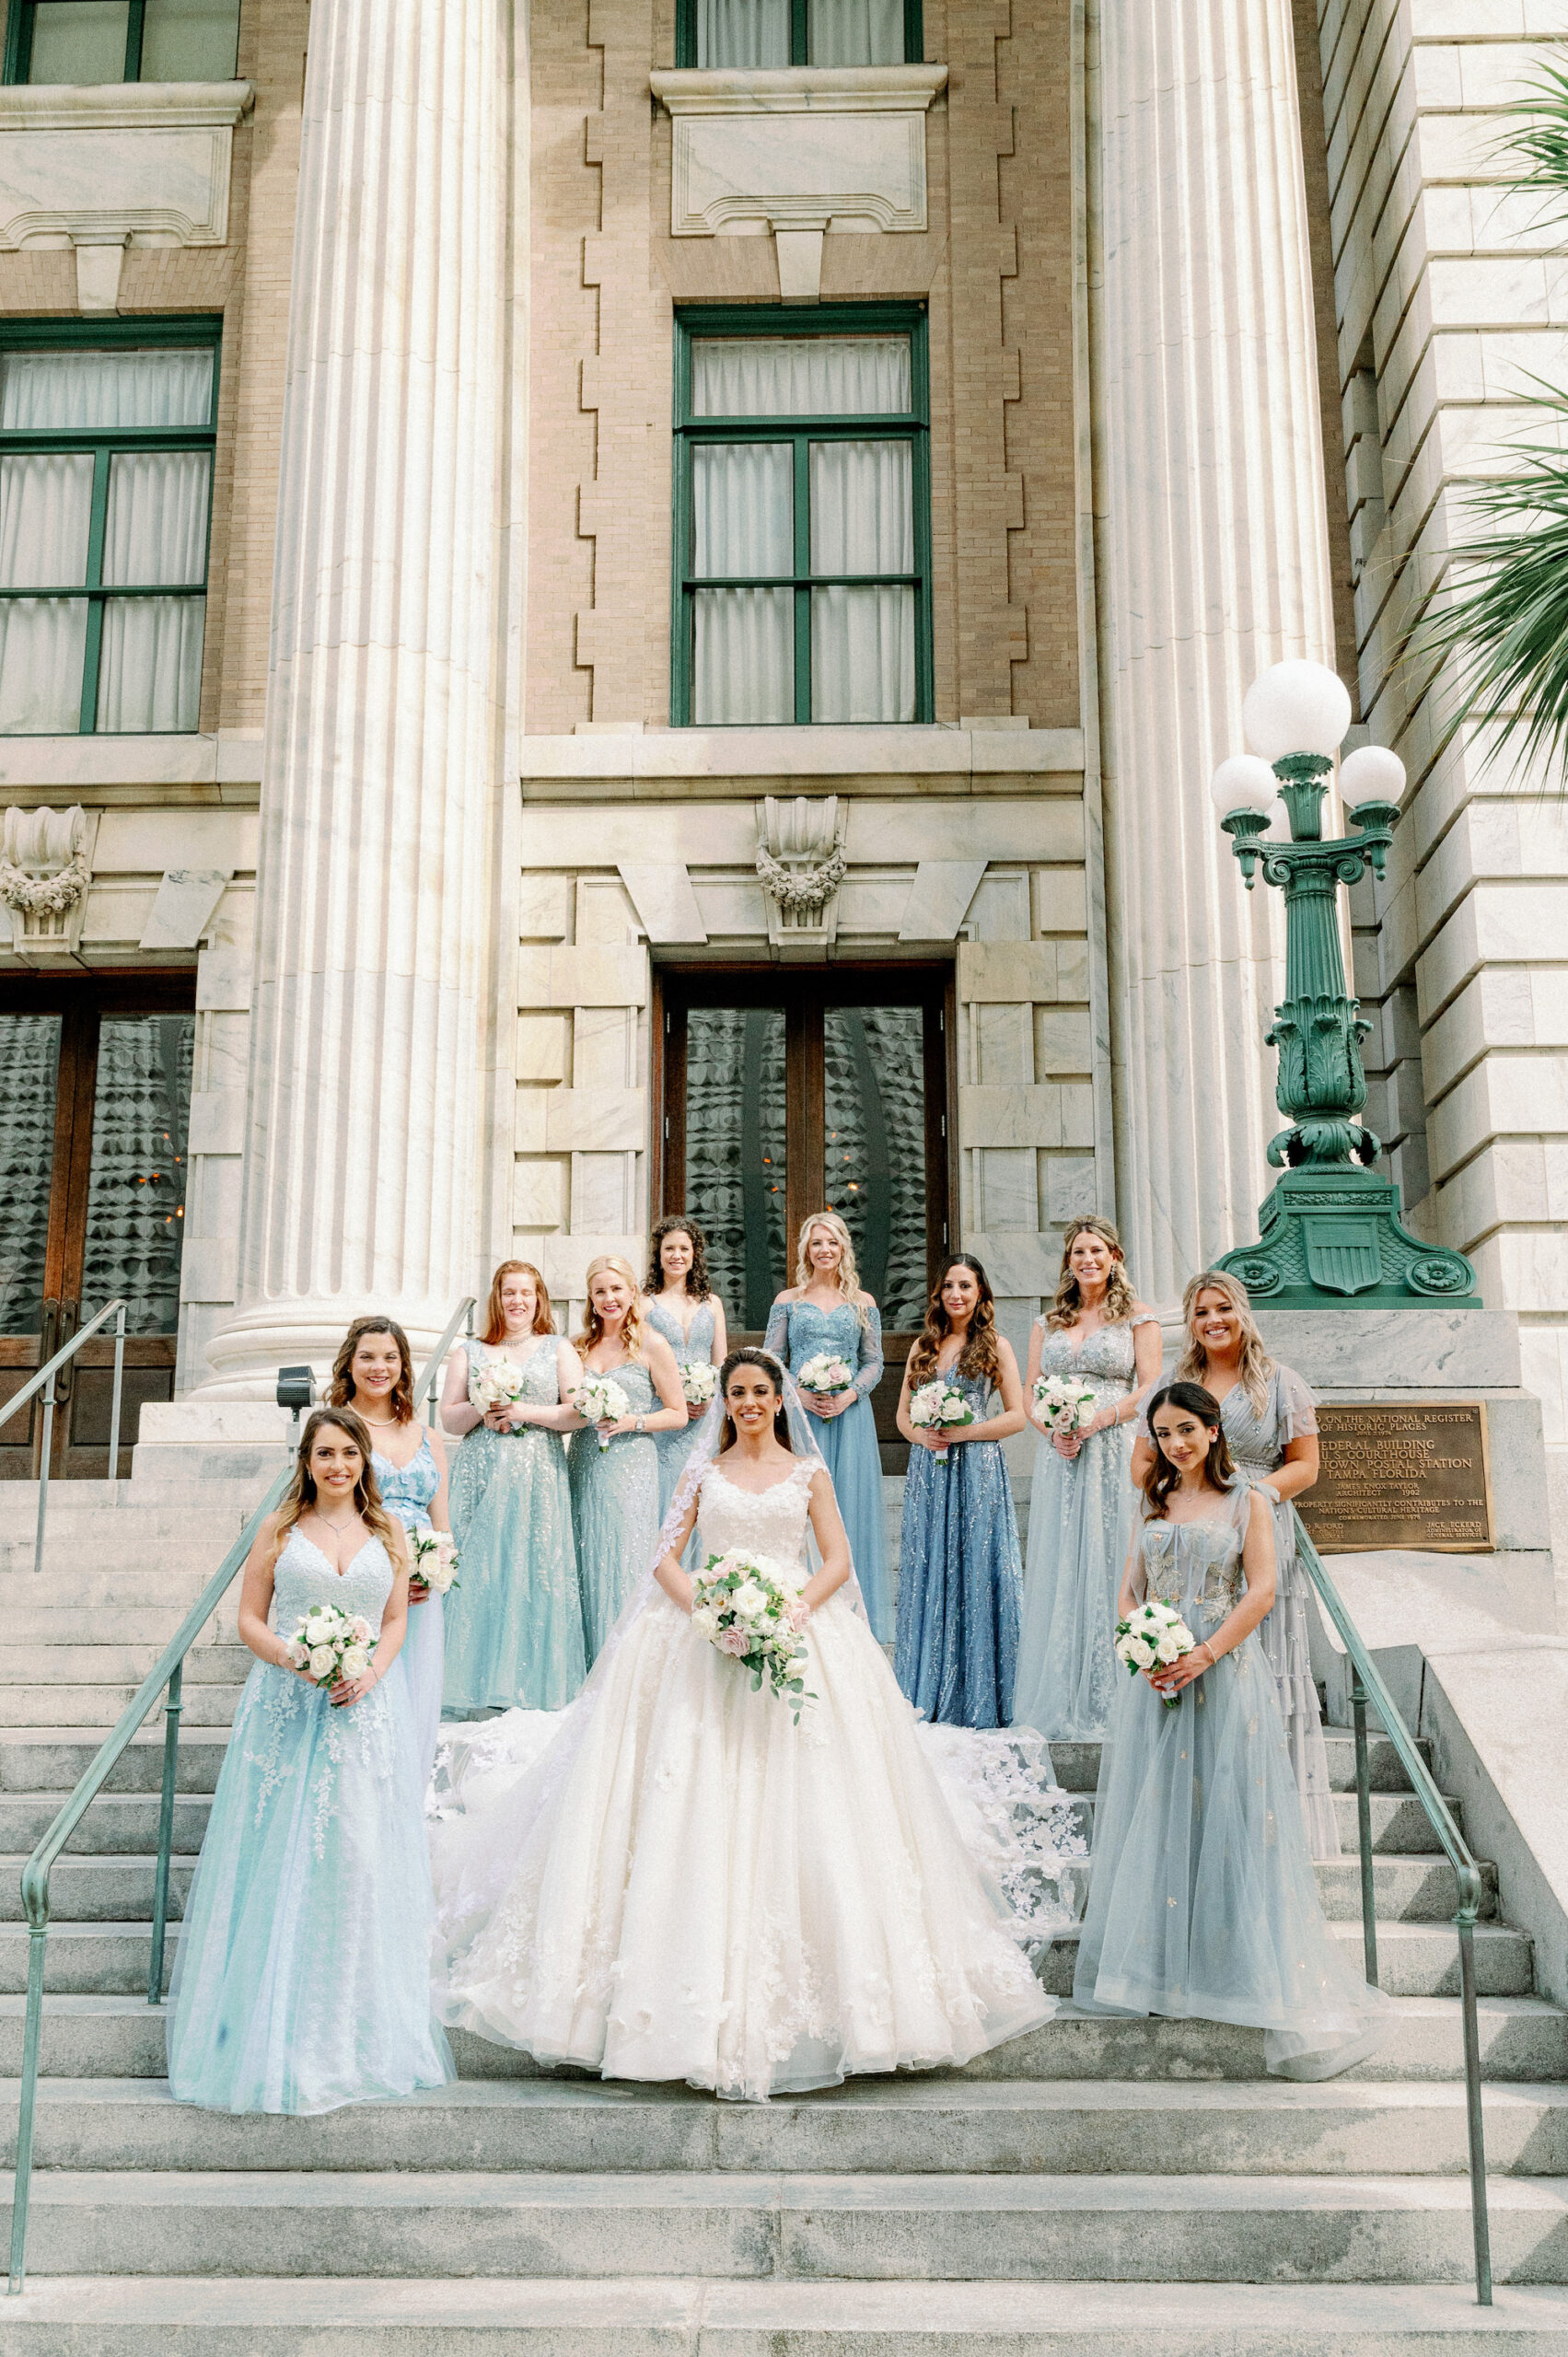 Sky Blue, Dusty Blue Mismatching Bridesmaids Dress Inspiration | Bride and Groom First Look Wedding Portrait | Tampa Bay Wedding Photographer Dewitt for Love Photography | Hair and Makeup Femme Akoi Beauty Studio